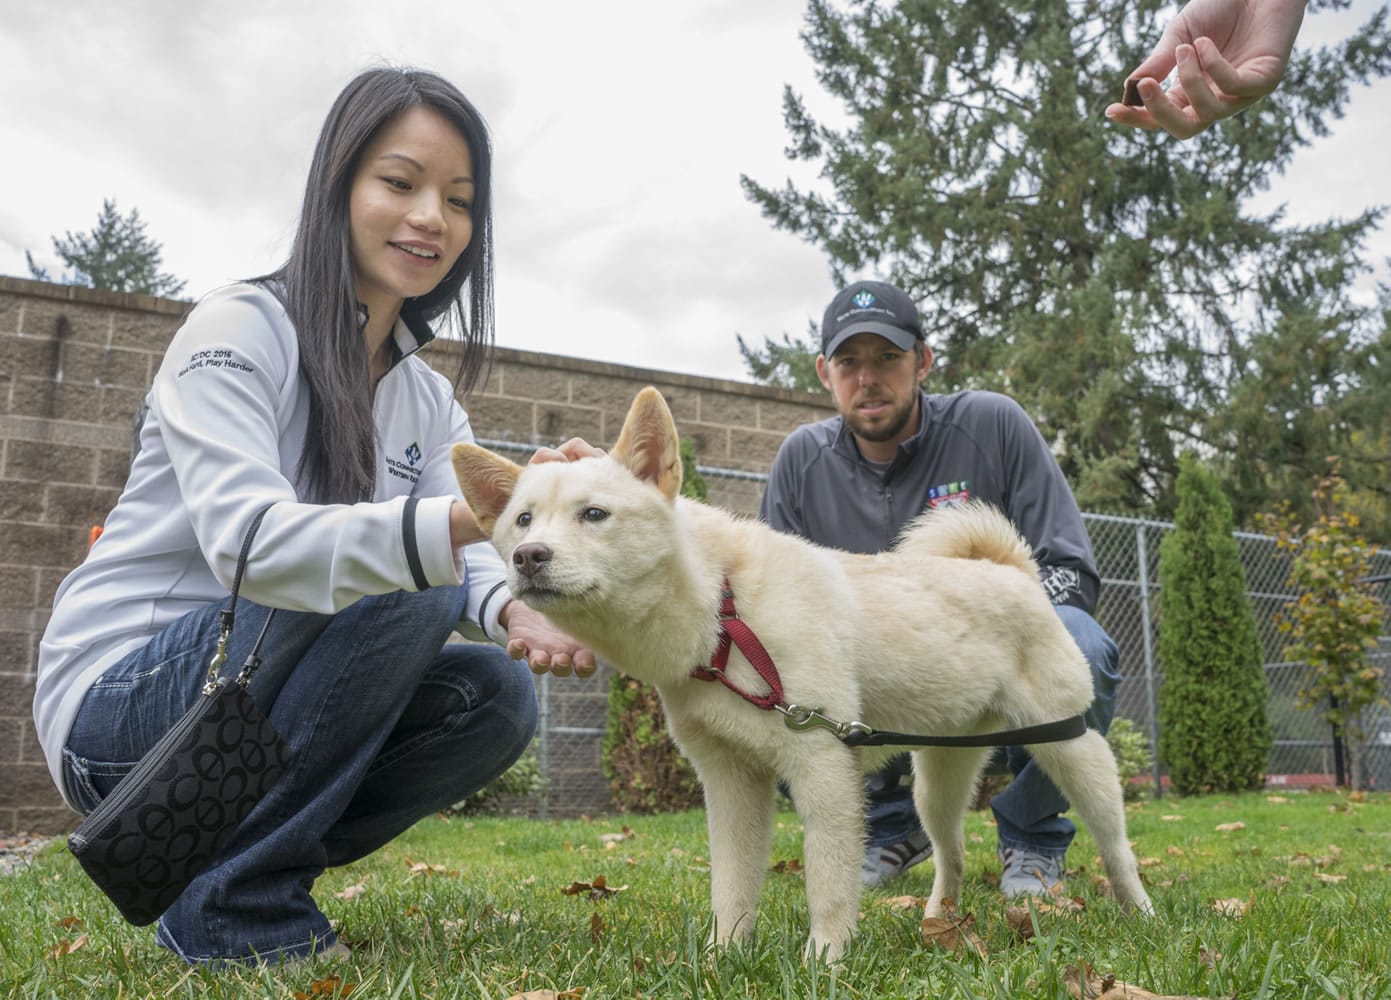 Autumn and Jeff, a couple from Vancouver, walk a 5-month-old Jindo mix, who they are renaming Seoul, before taking her home on Saturday. The puppy was rescued from a South Korean dog meat farm this summer.